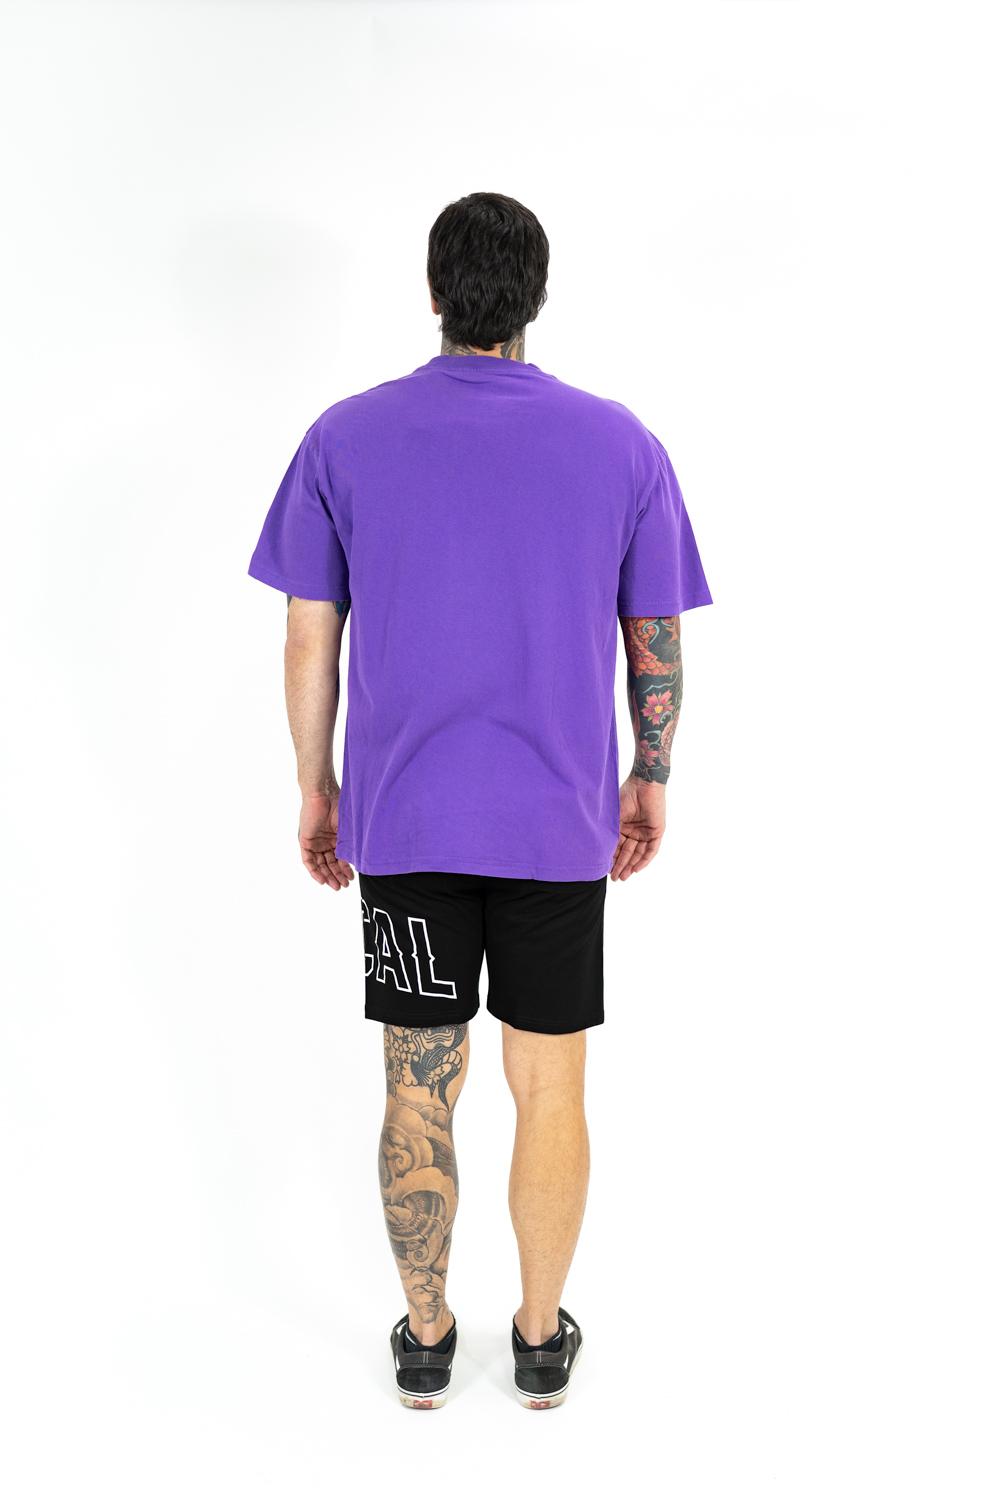 INCLINE STACK TEE SUNS Faded Purple